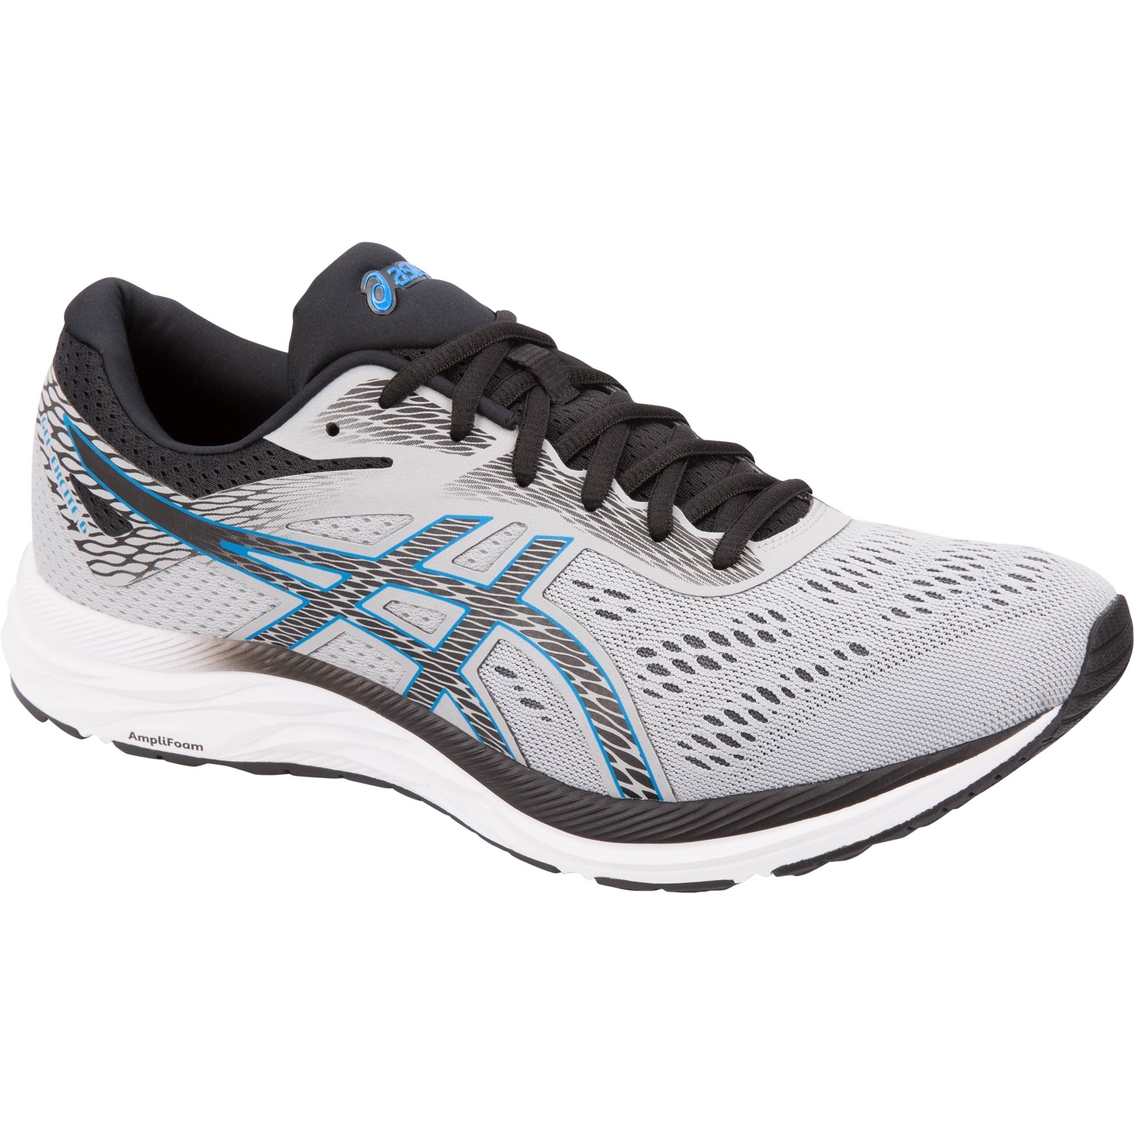 Asics Men's Gel-excite 6 Running Shoes | Running | Shoes | Shop The ...